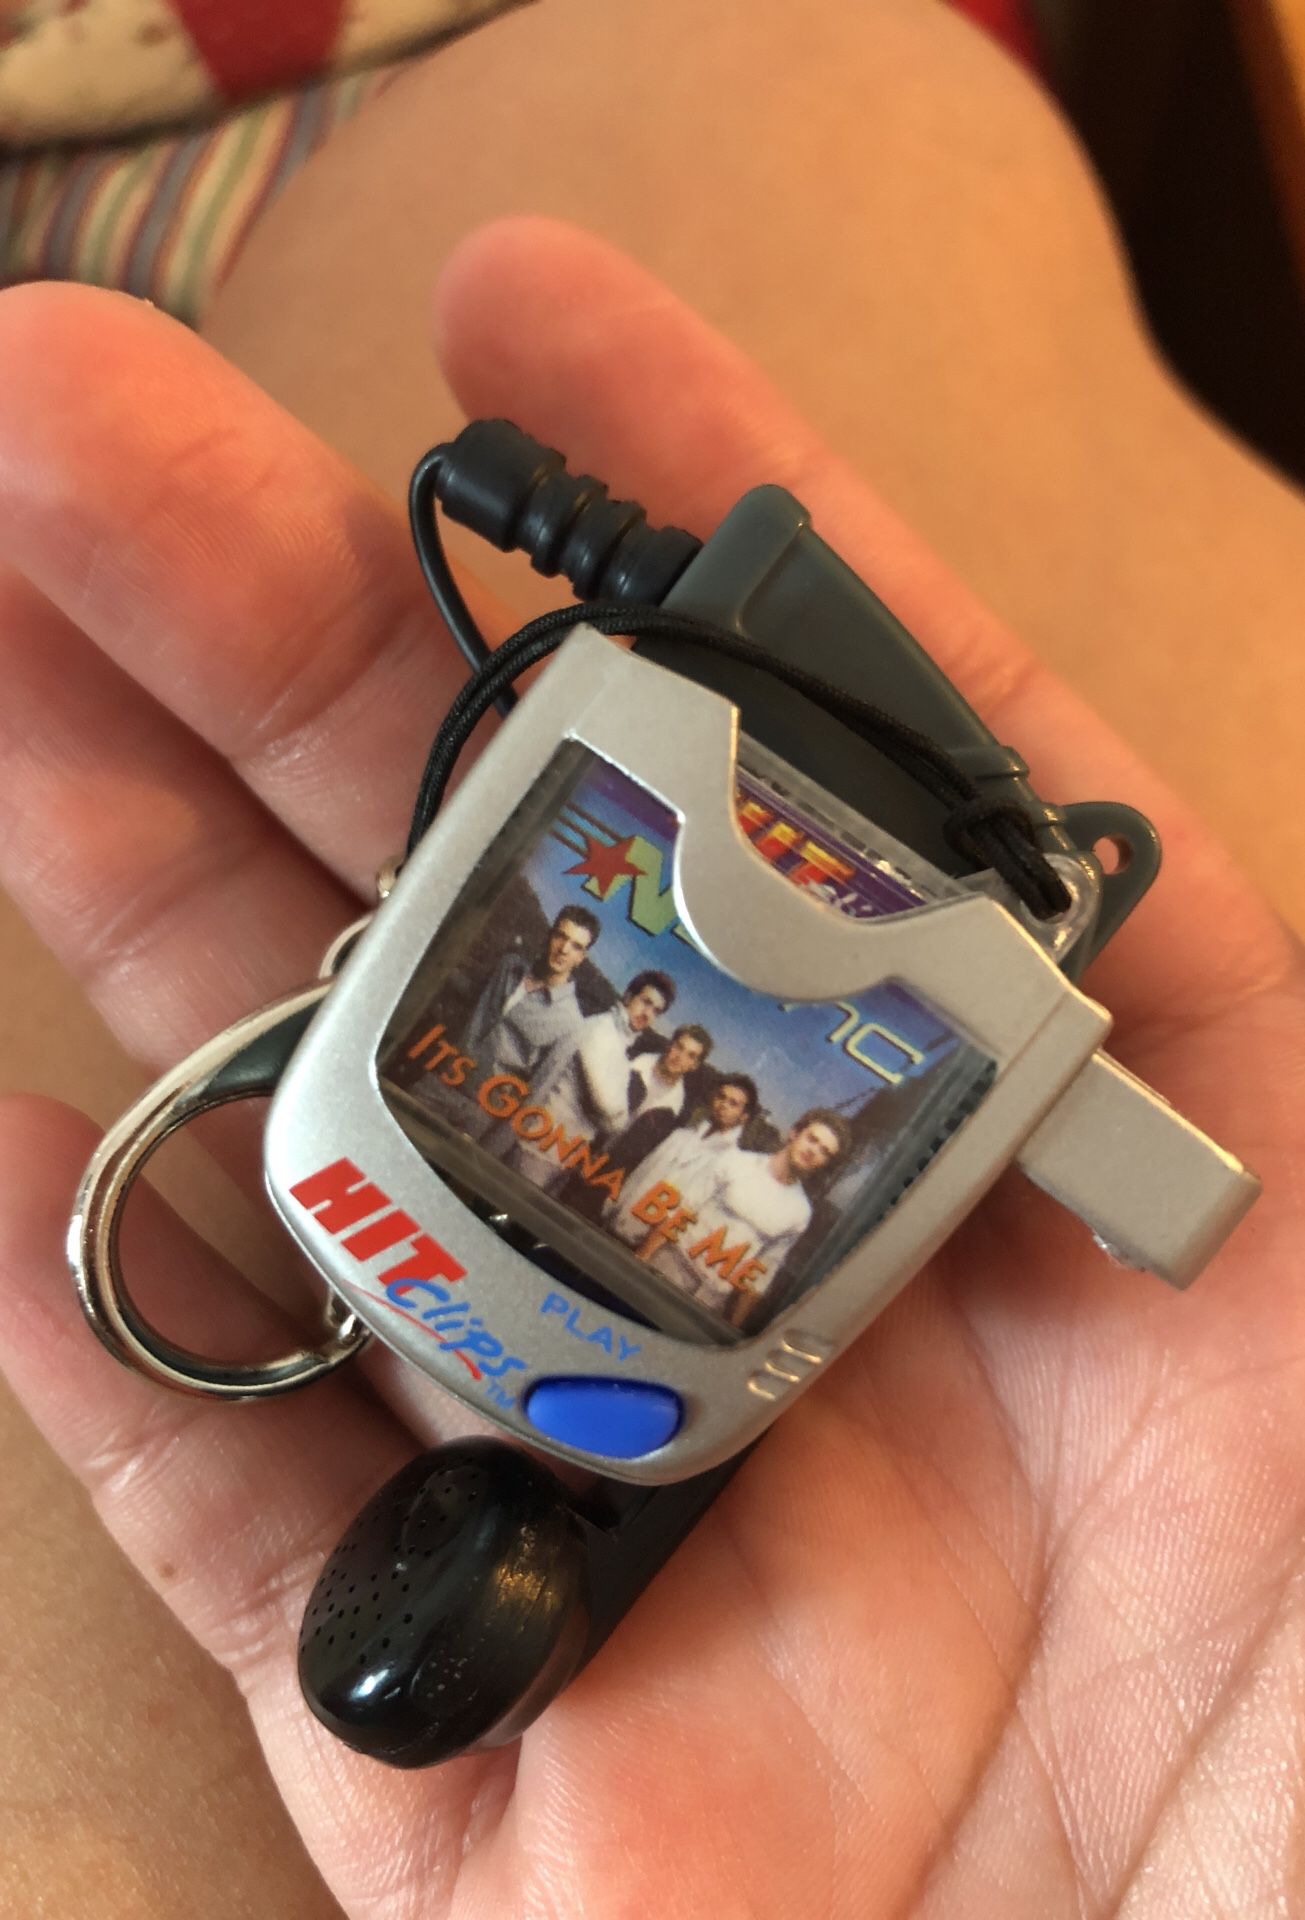 Hit clips player for Sale in El Paso, TX - OfferUp